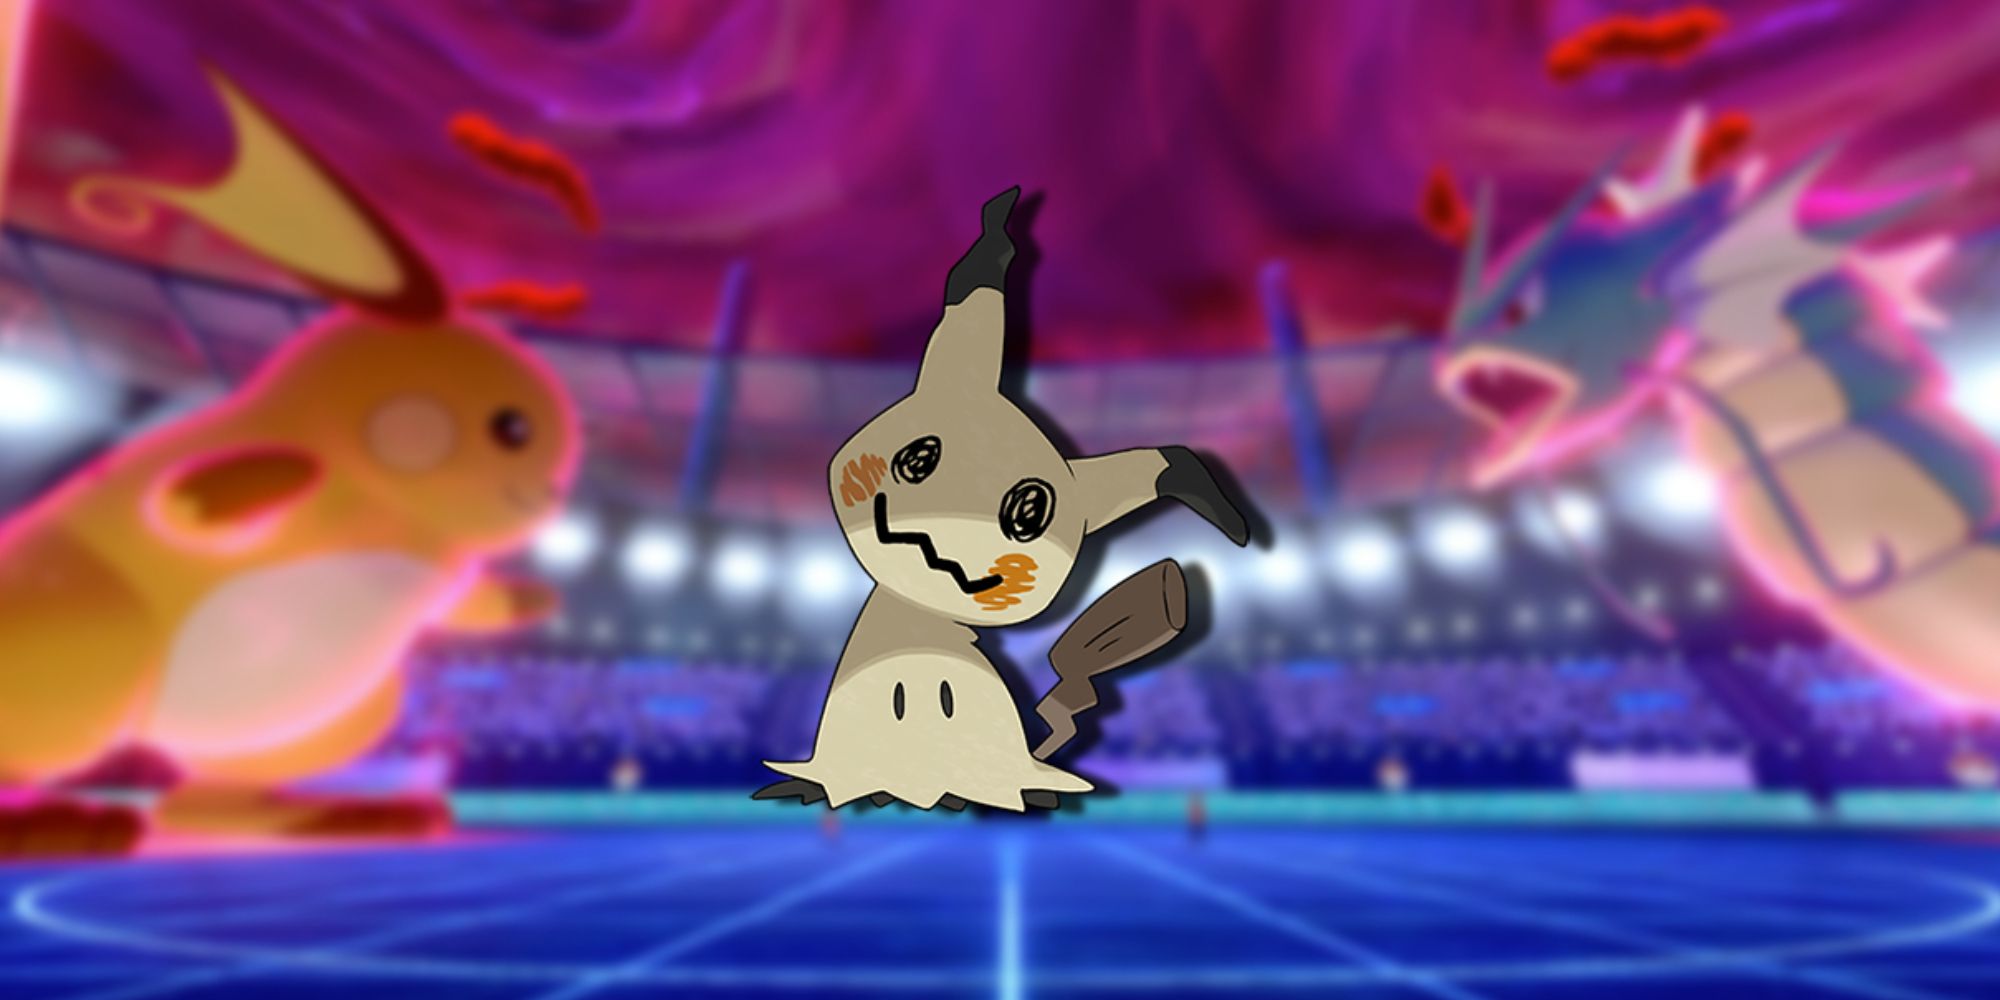 The pokemon Mimikyu is designed to look cute but under the disguise it could easily kill a human